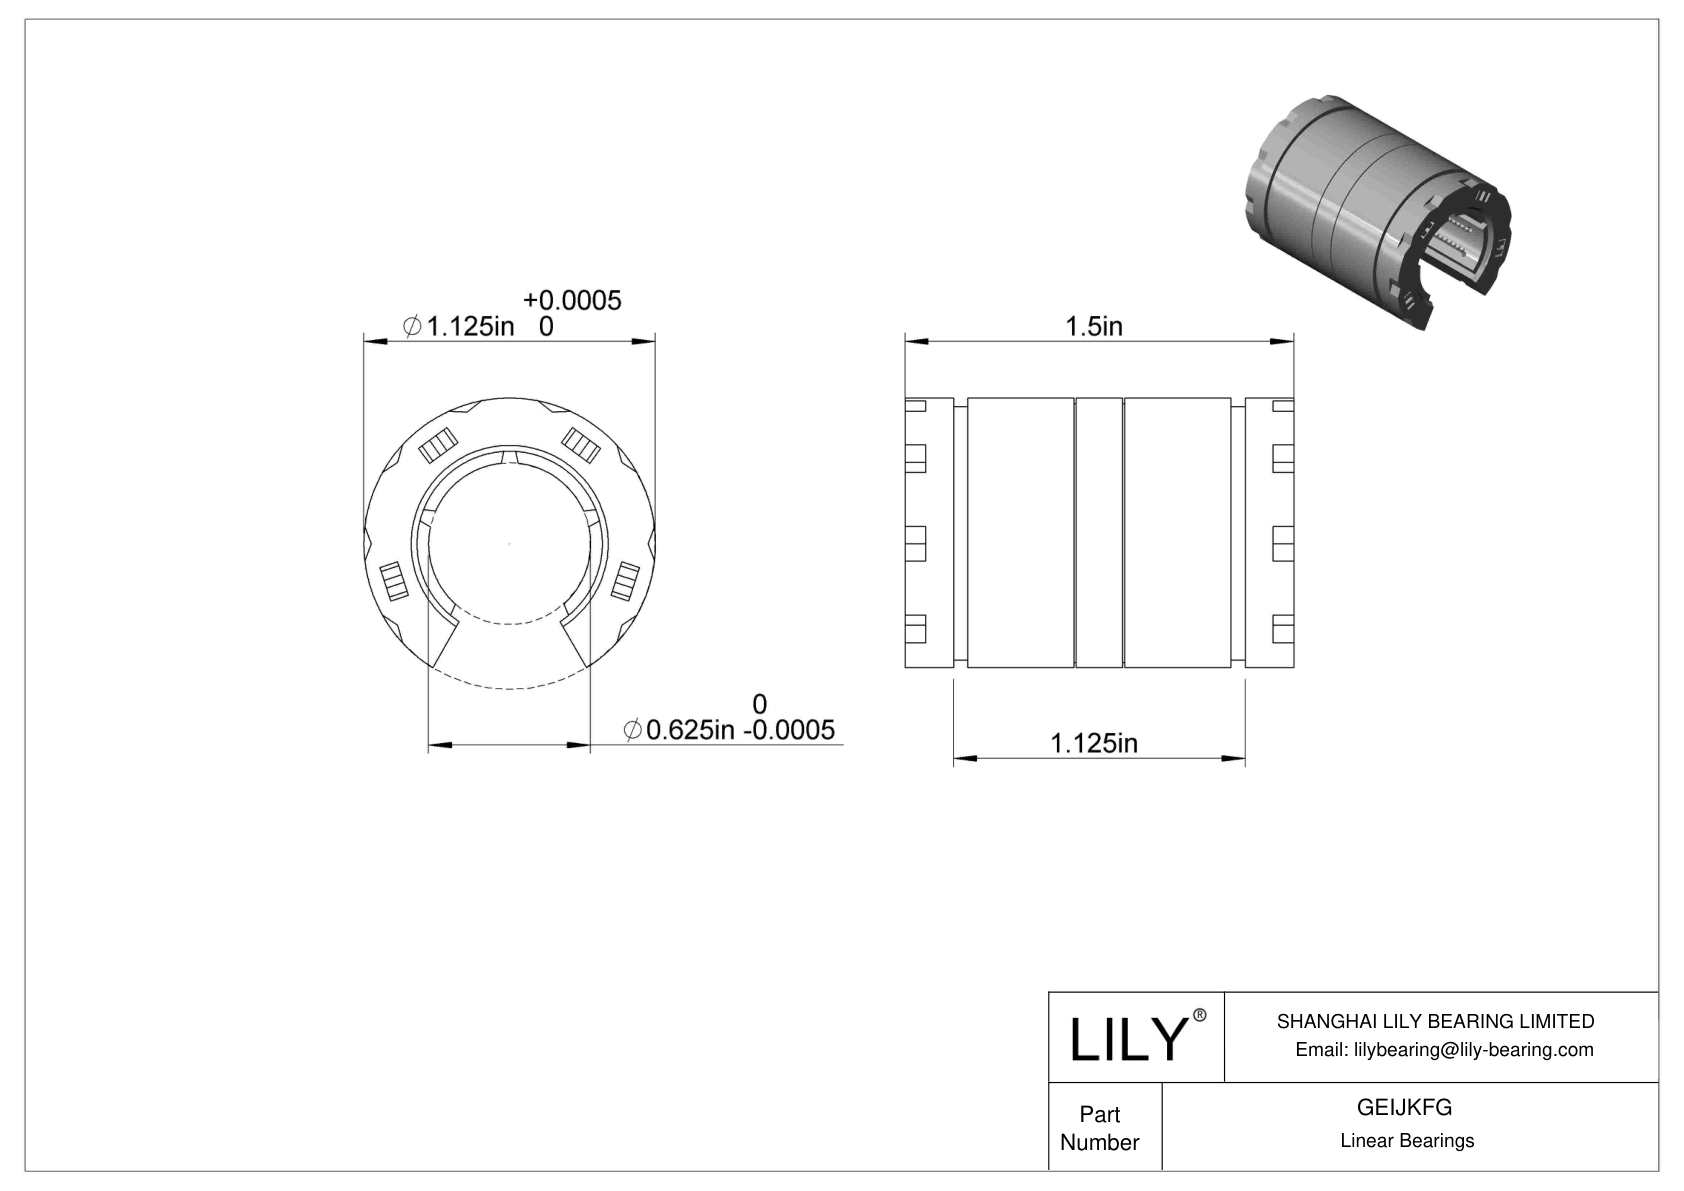 GEIJKFG High-Load Linear Ball Bearings for Support Rail Shafts cad drawing